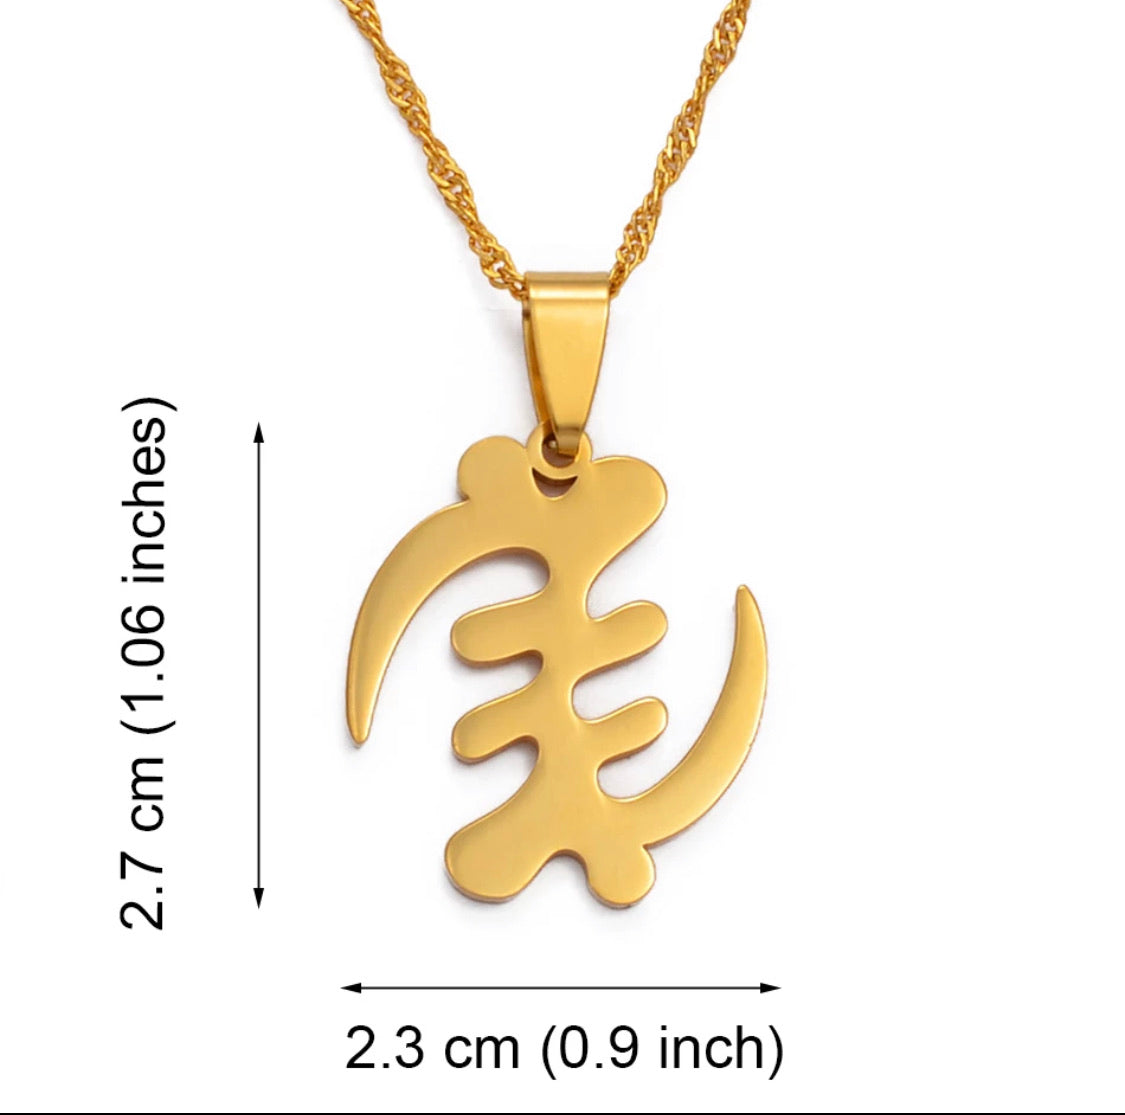 Gold Color Stainless Steel Adinkra Gye Nyame Ethnic Jewelry